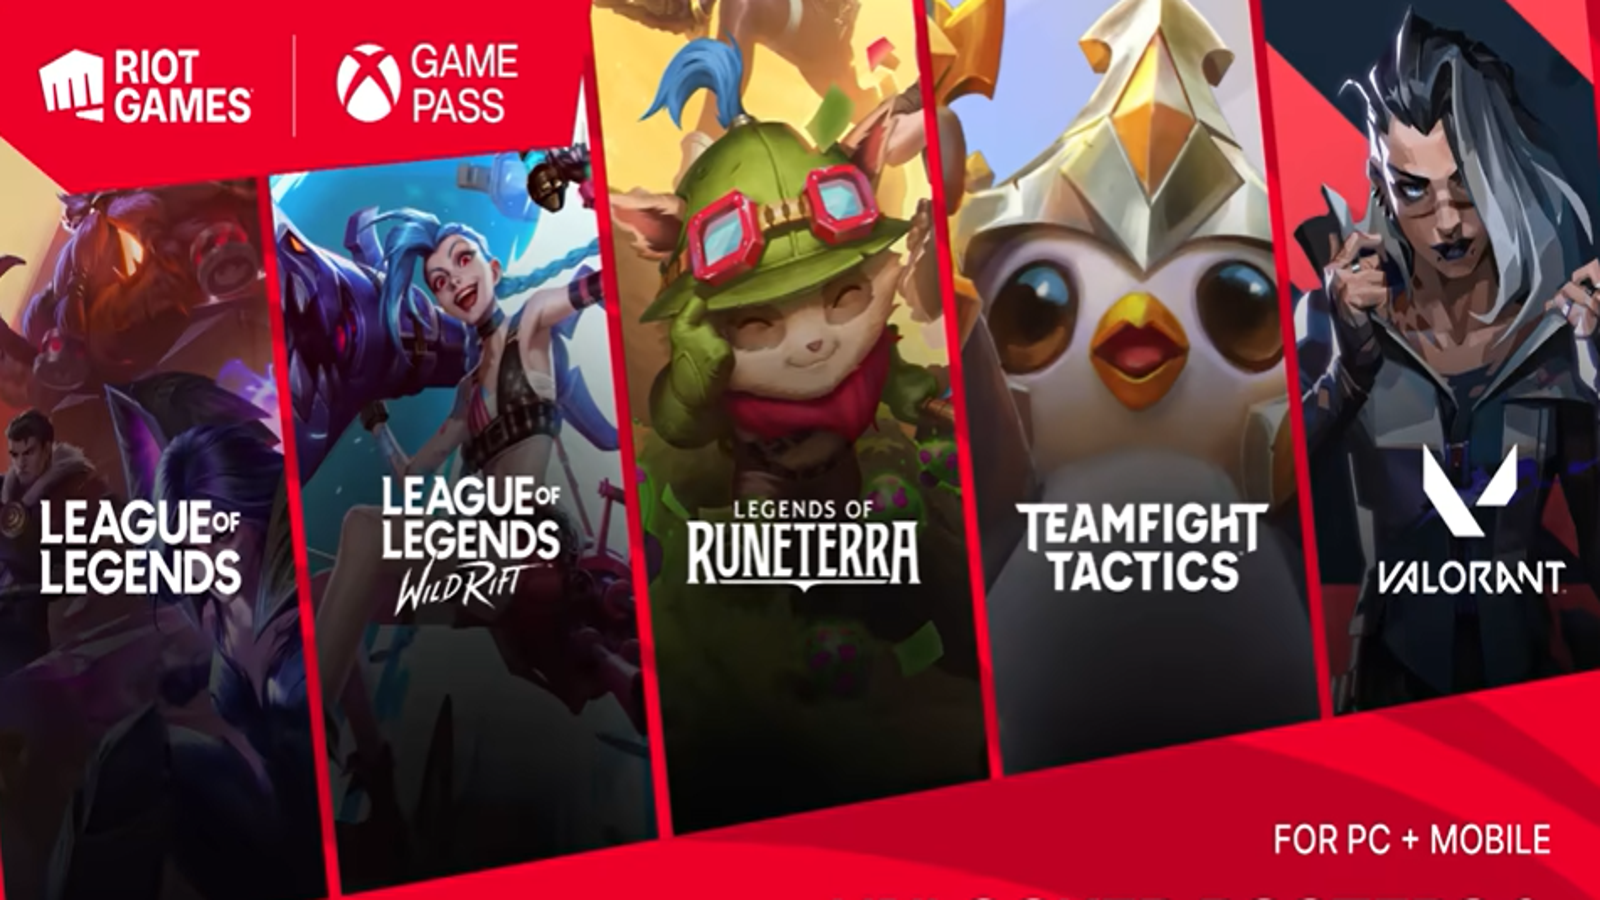 Riot Games on X: #TheUnlock is here! We've teamed up with #XboxGamePass to  level up your experience across all of our titles with fully unlocked Agent  and champion rosters, 100+ Little Legends